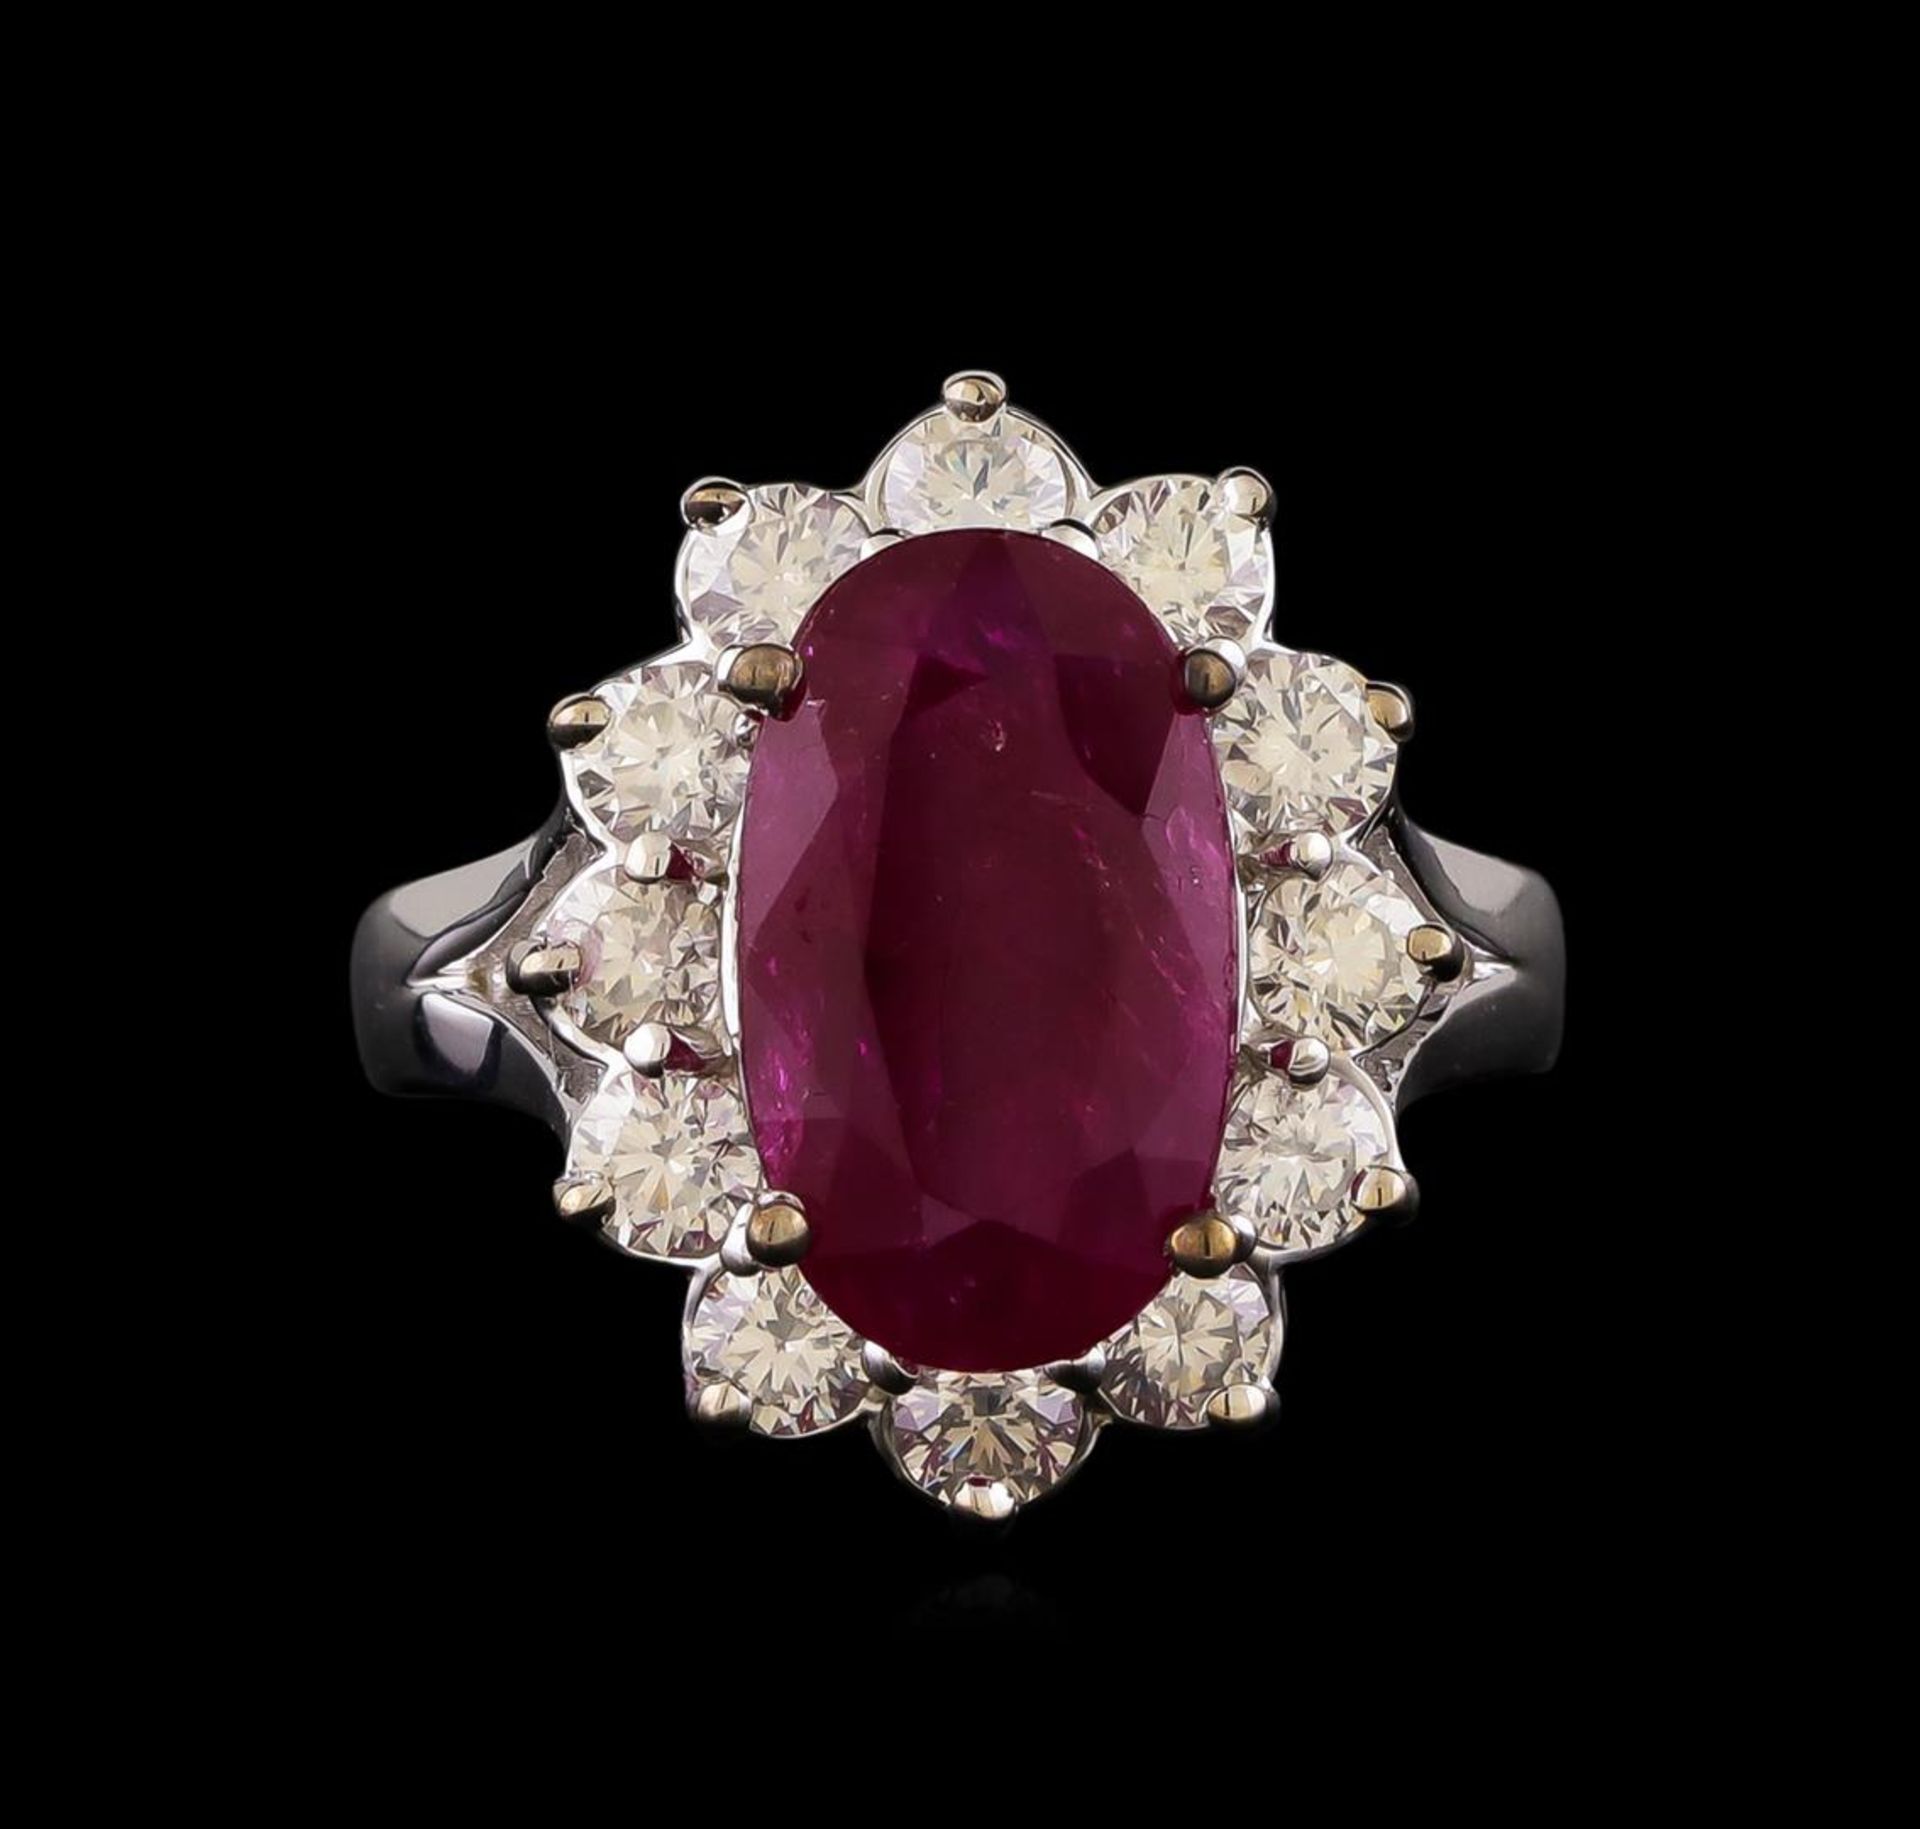 GIA Cert 4.09 ctw Ruby and Diamond Ring - 14KT White Gold - Image 2 of 6